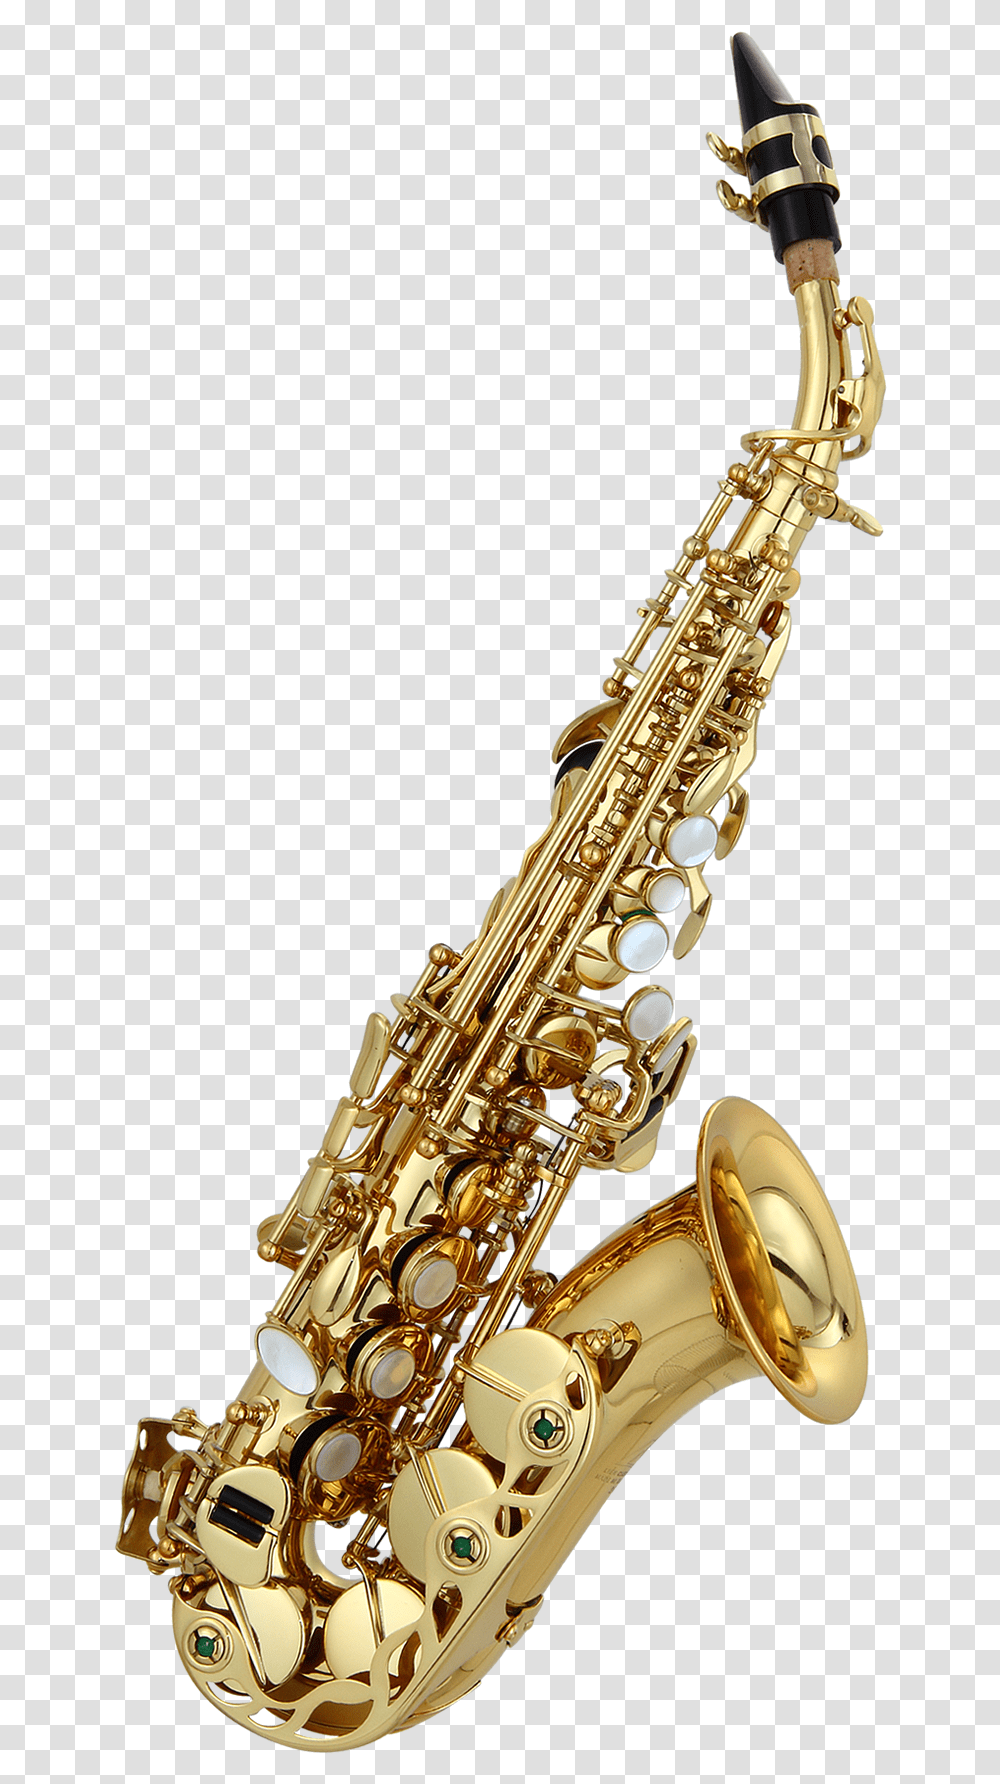 Clip Black And White Download Lien Cheng Co Ltd Curved, Leisure Activities, Saxophone, Musical Instrument, Sword Transparent Png